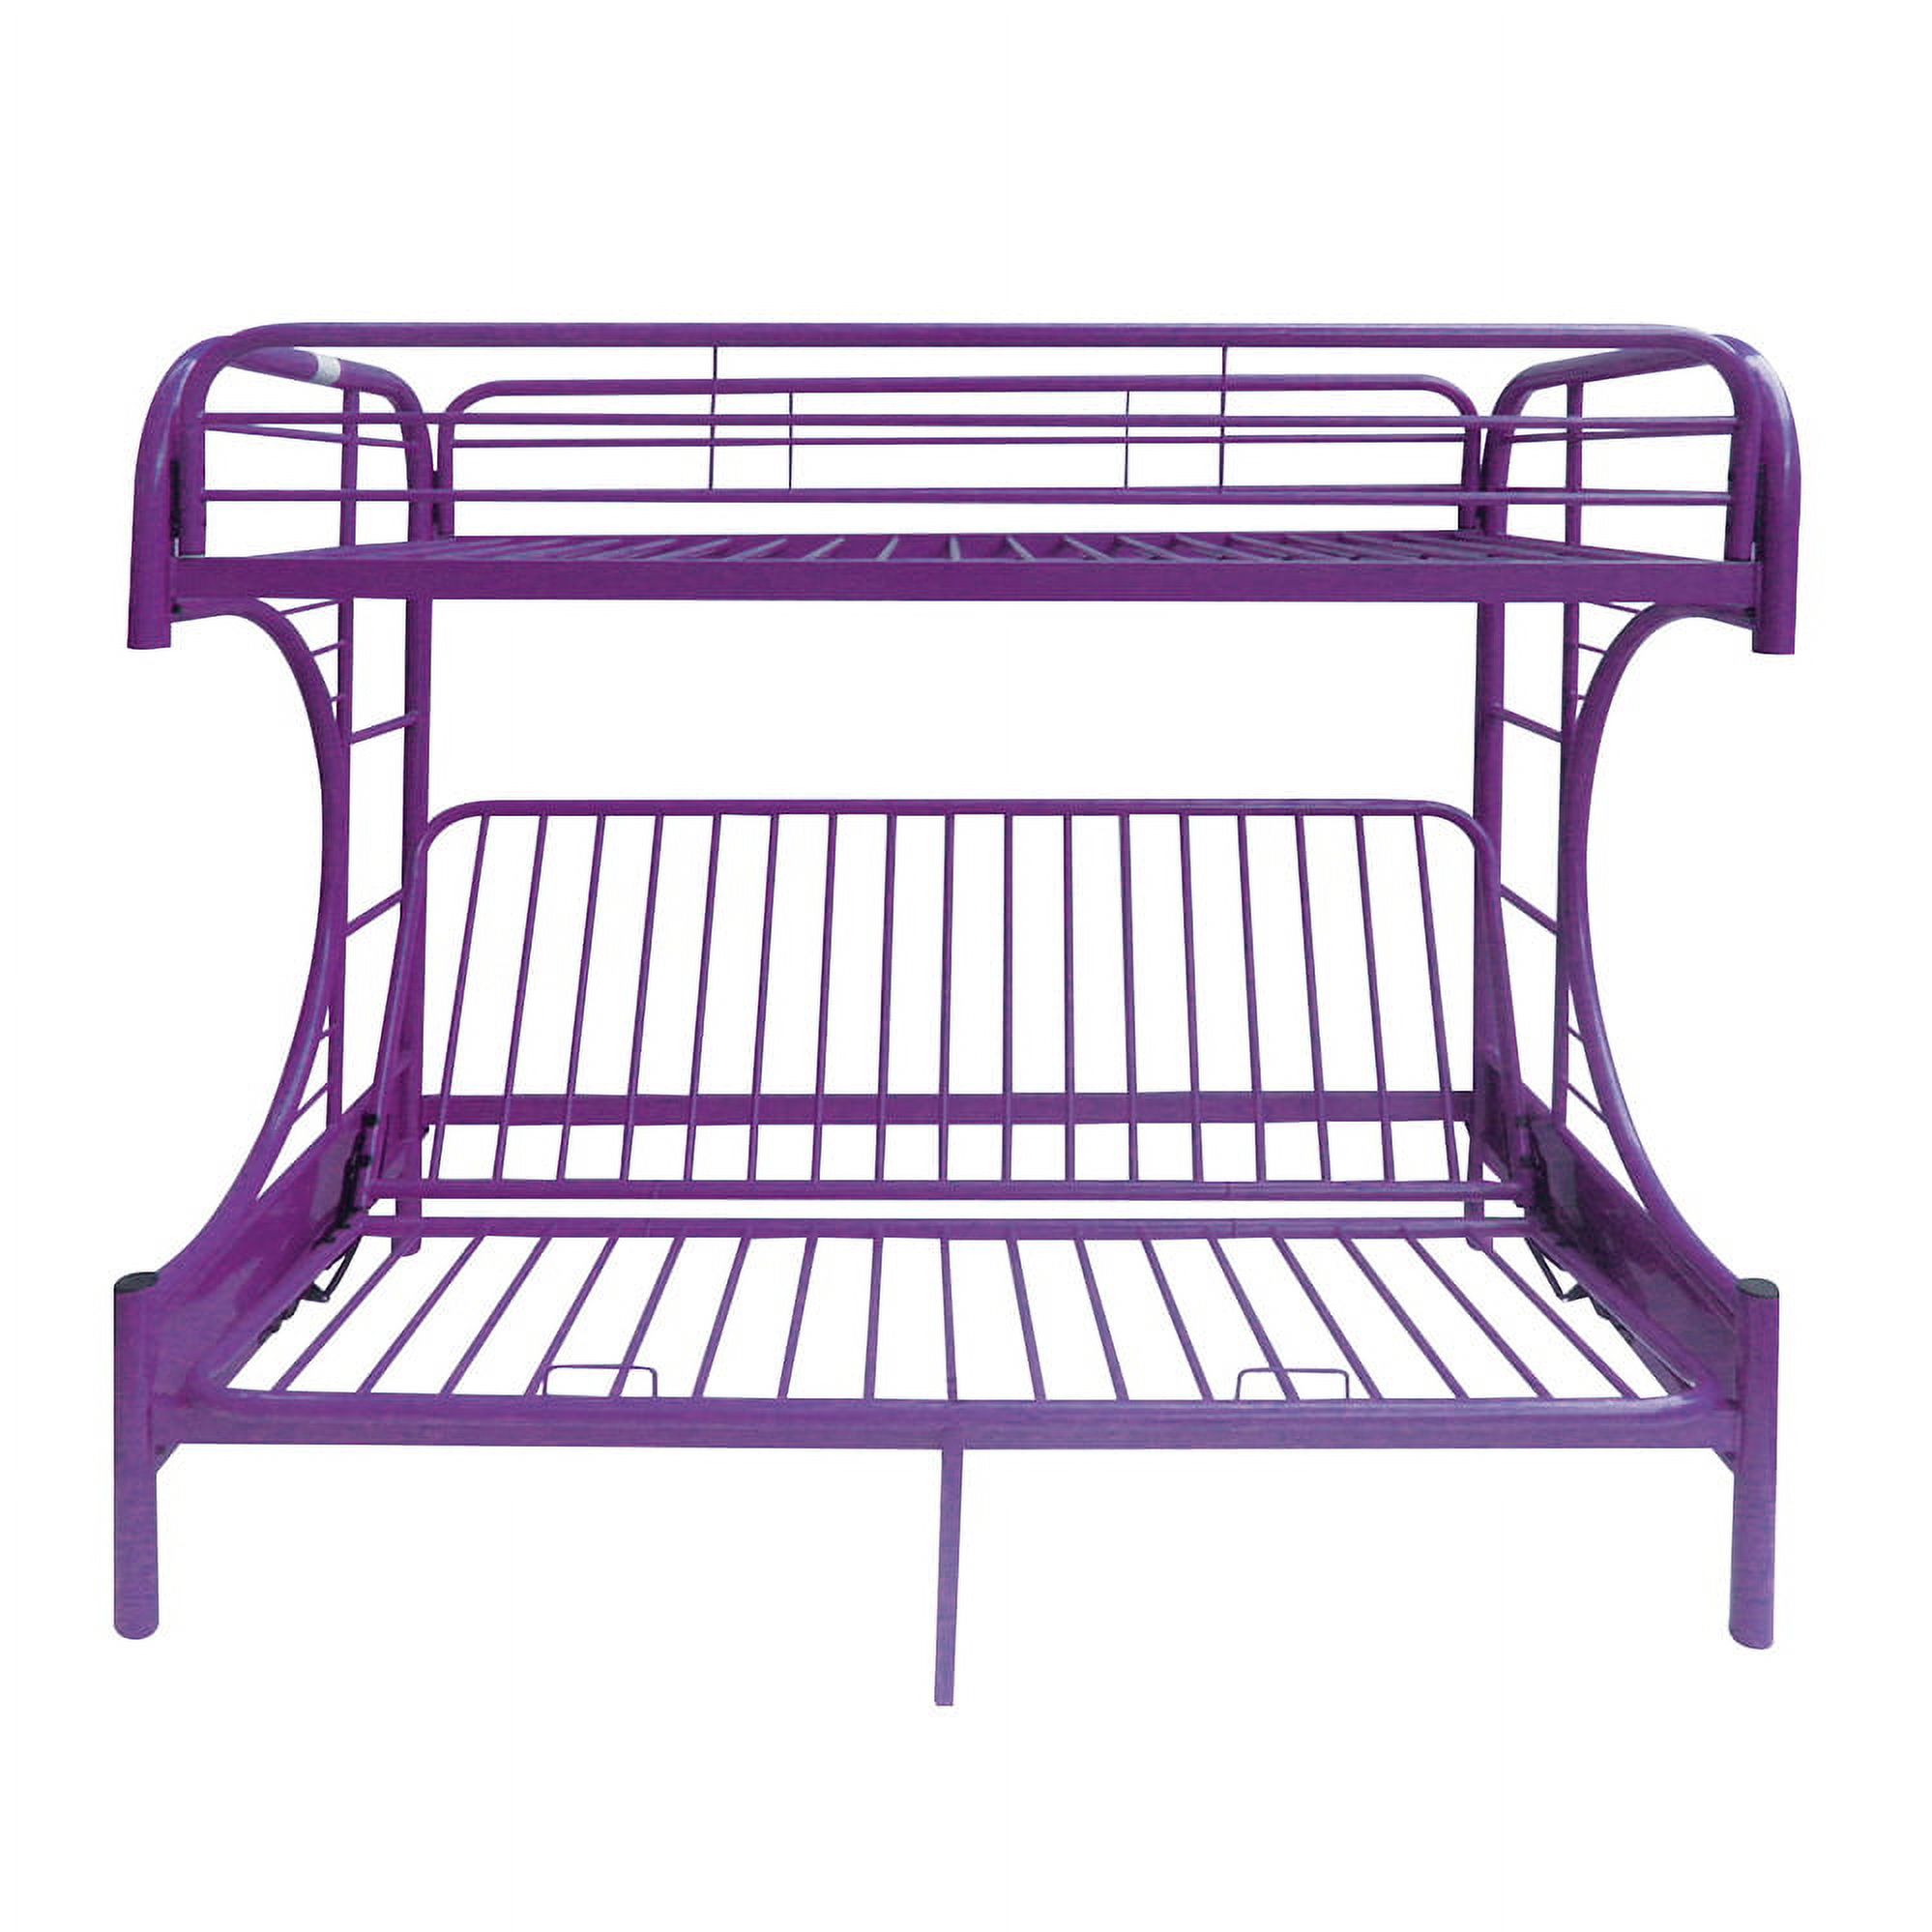 ACME Furniture Eclipse Twin over Full and Futon Bunk Bed in Purple - image 5 of 5